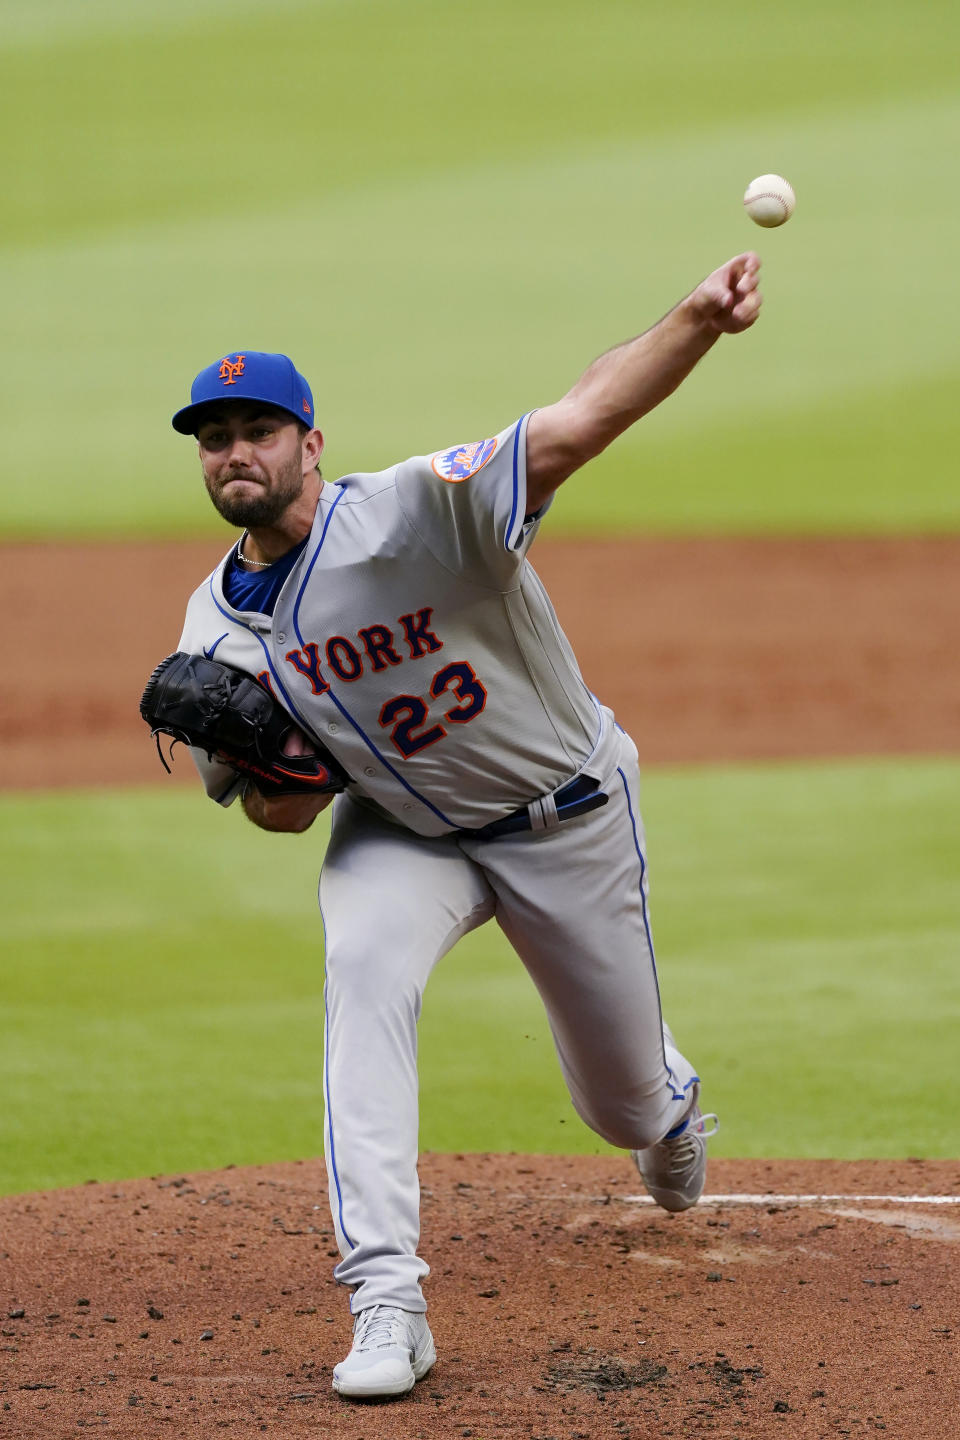 New York Mets starting pitcher David Peterson delivers in the first inning of the team's baseball game against the Atlanta Braves on Wednesday, June 30, 2021, in Atlanta. (AP Photo/John Bazemore)